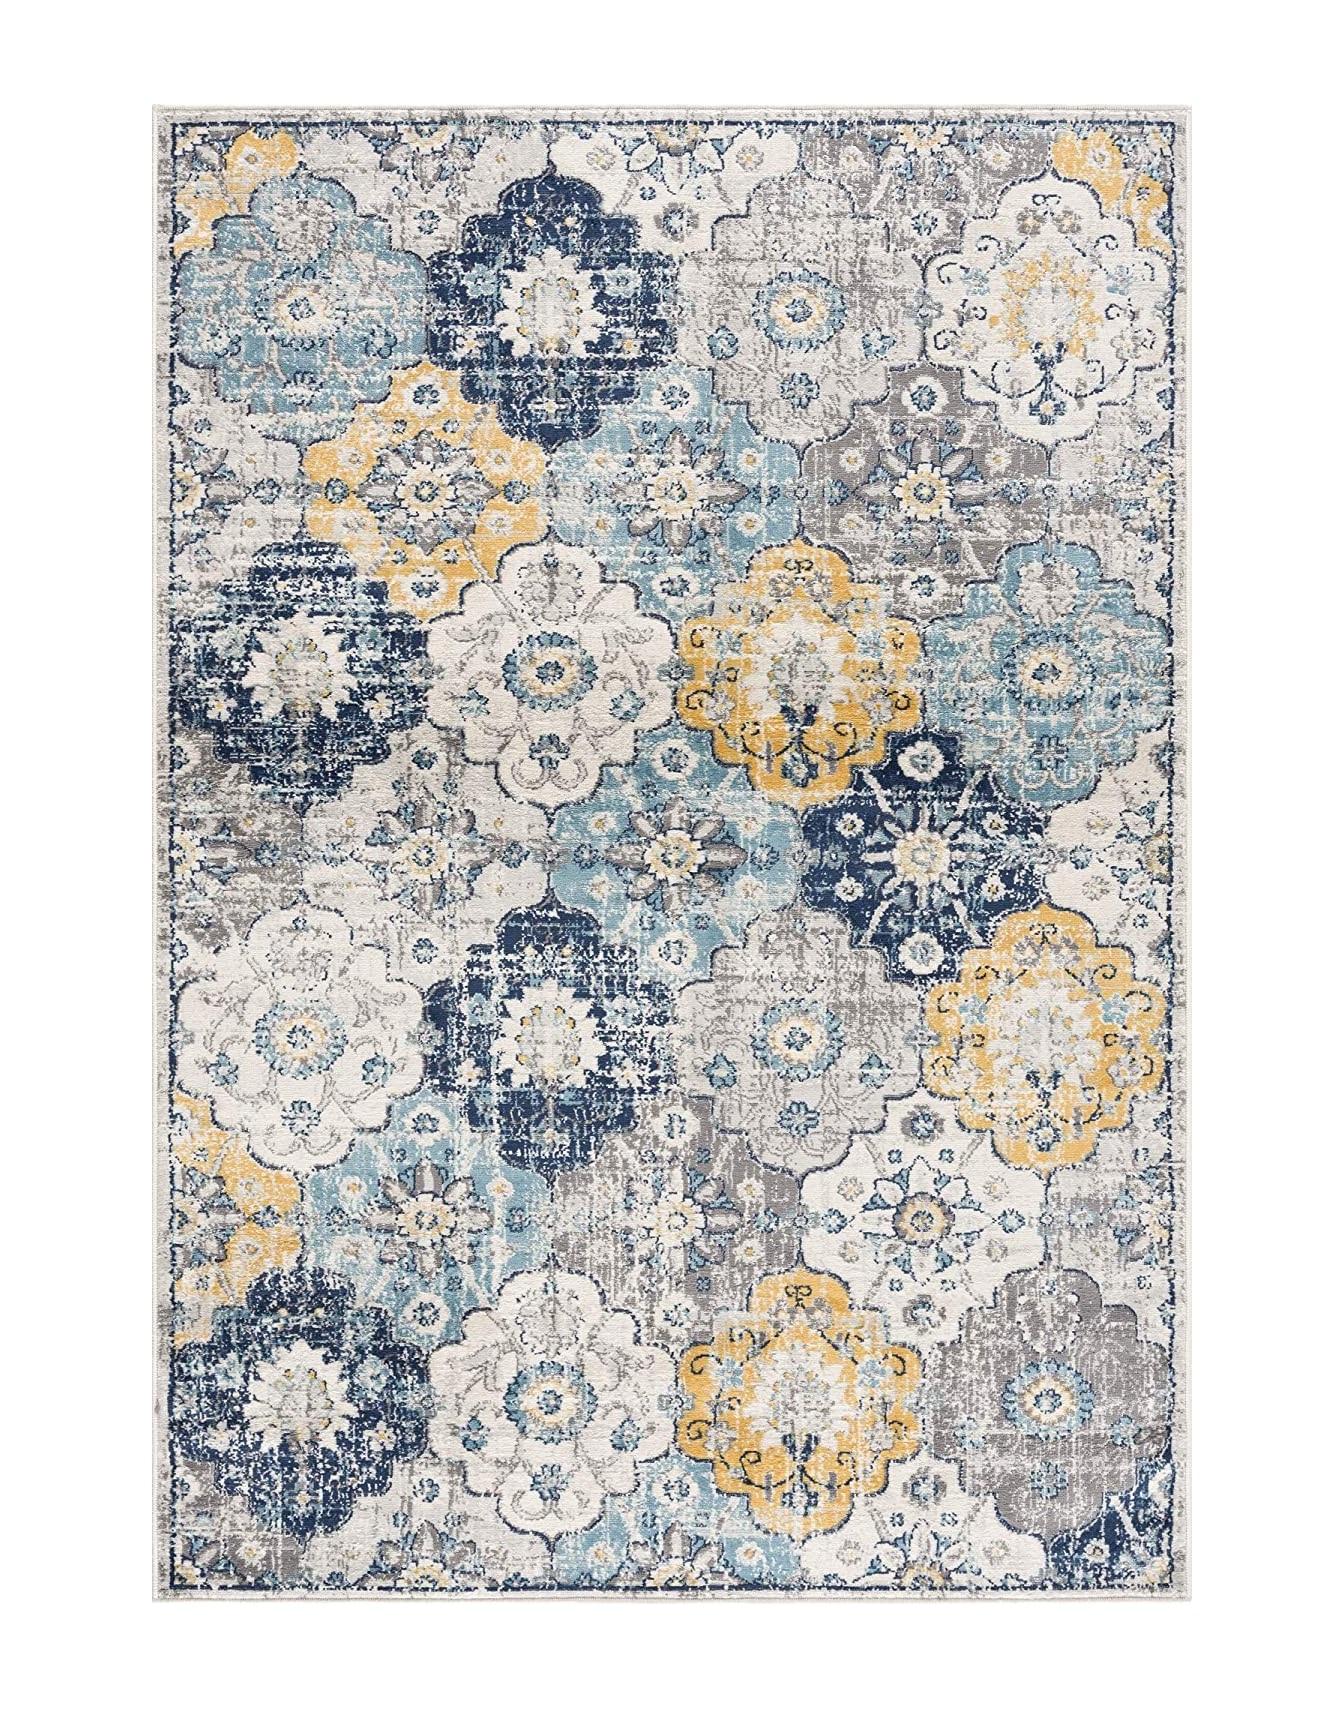 2’ x 6’ Blue Distressed Floral Area Rug